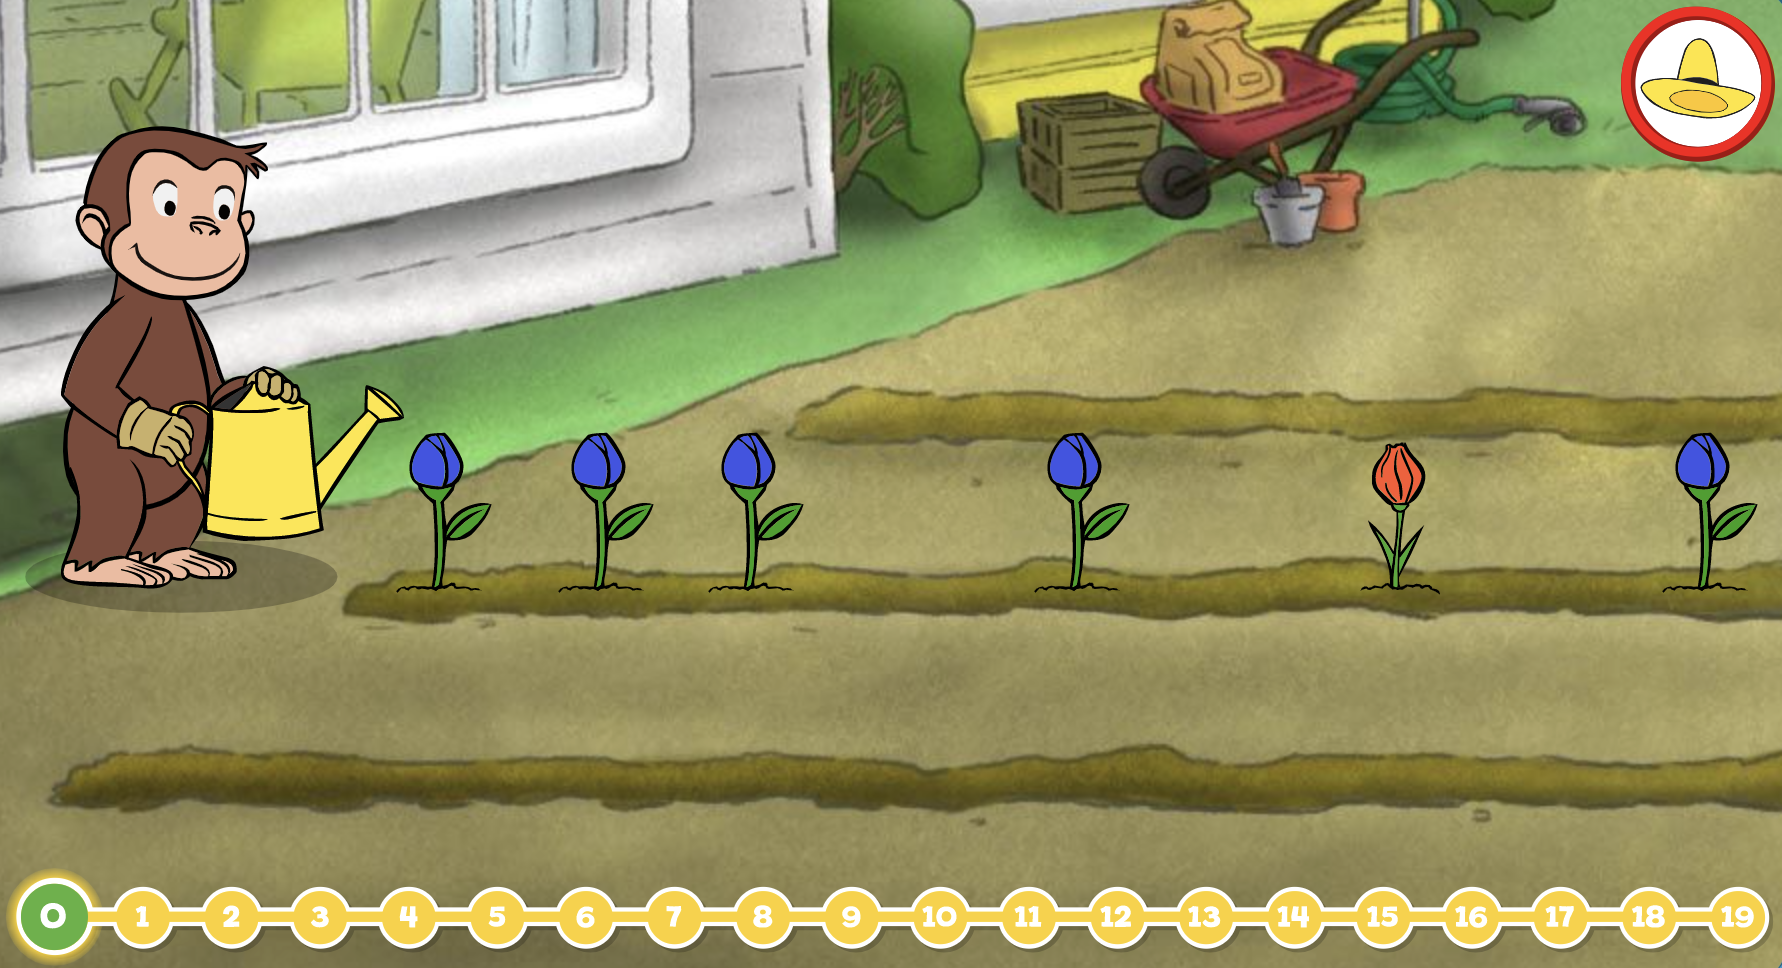 Curious George flower counting game